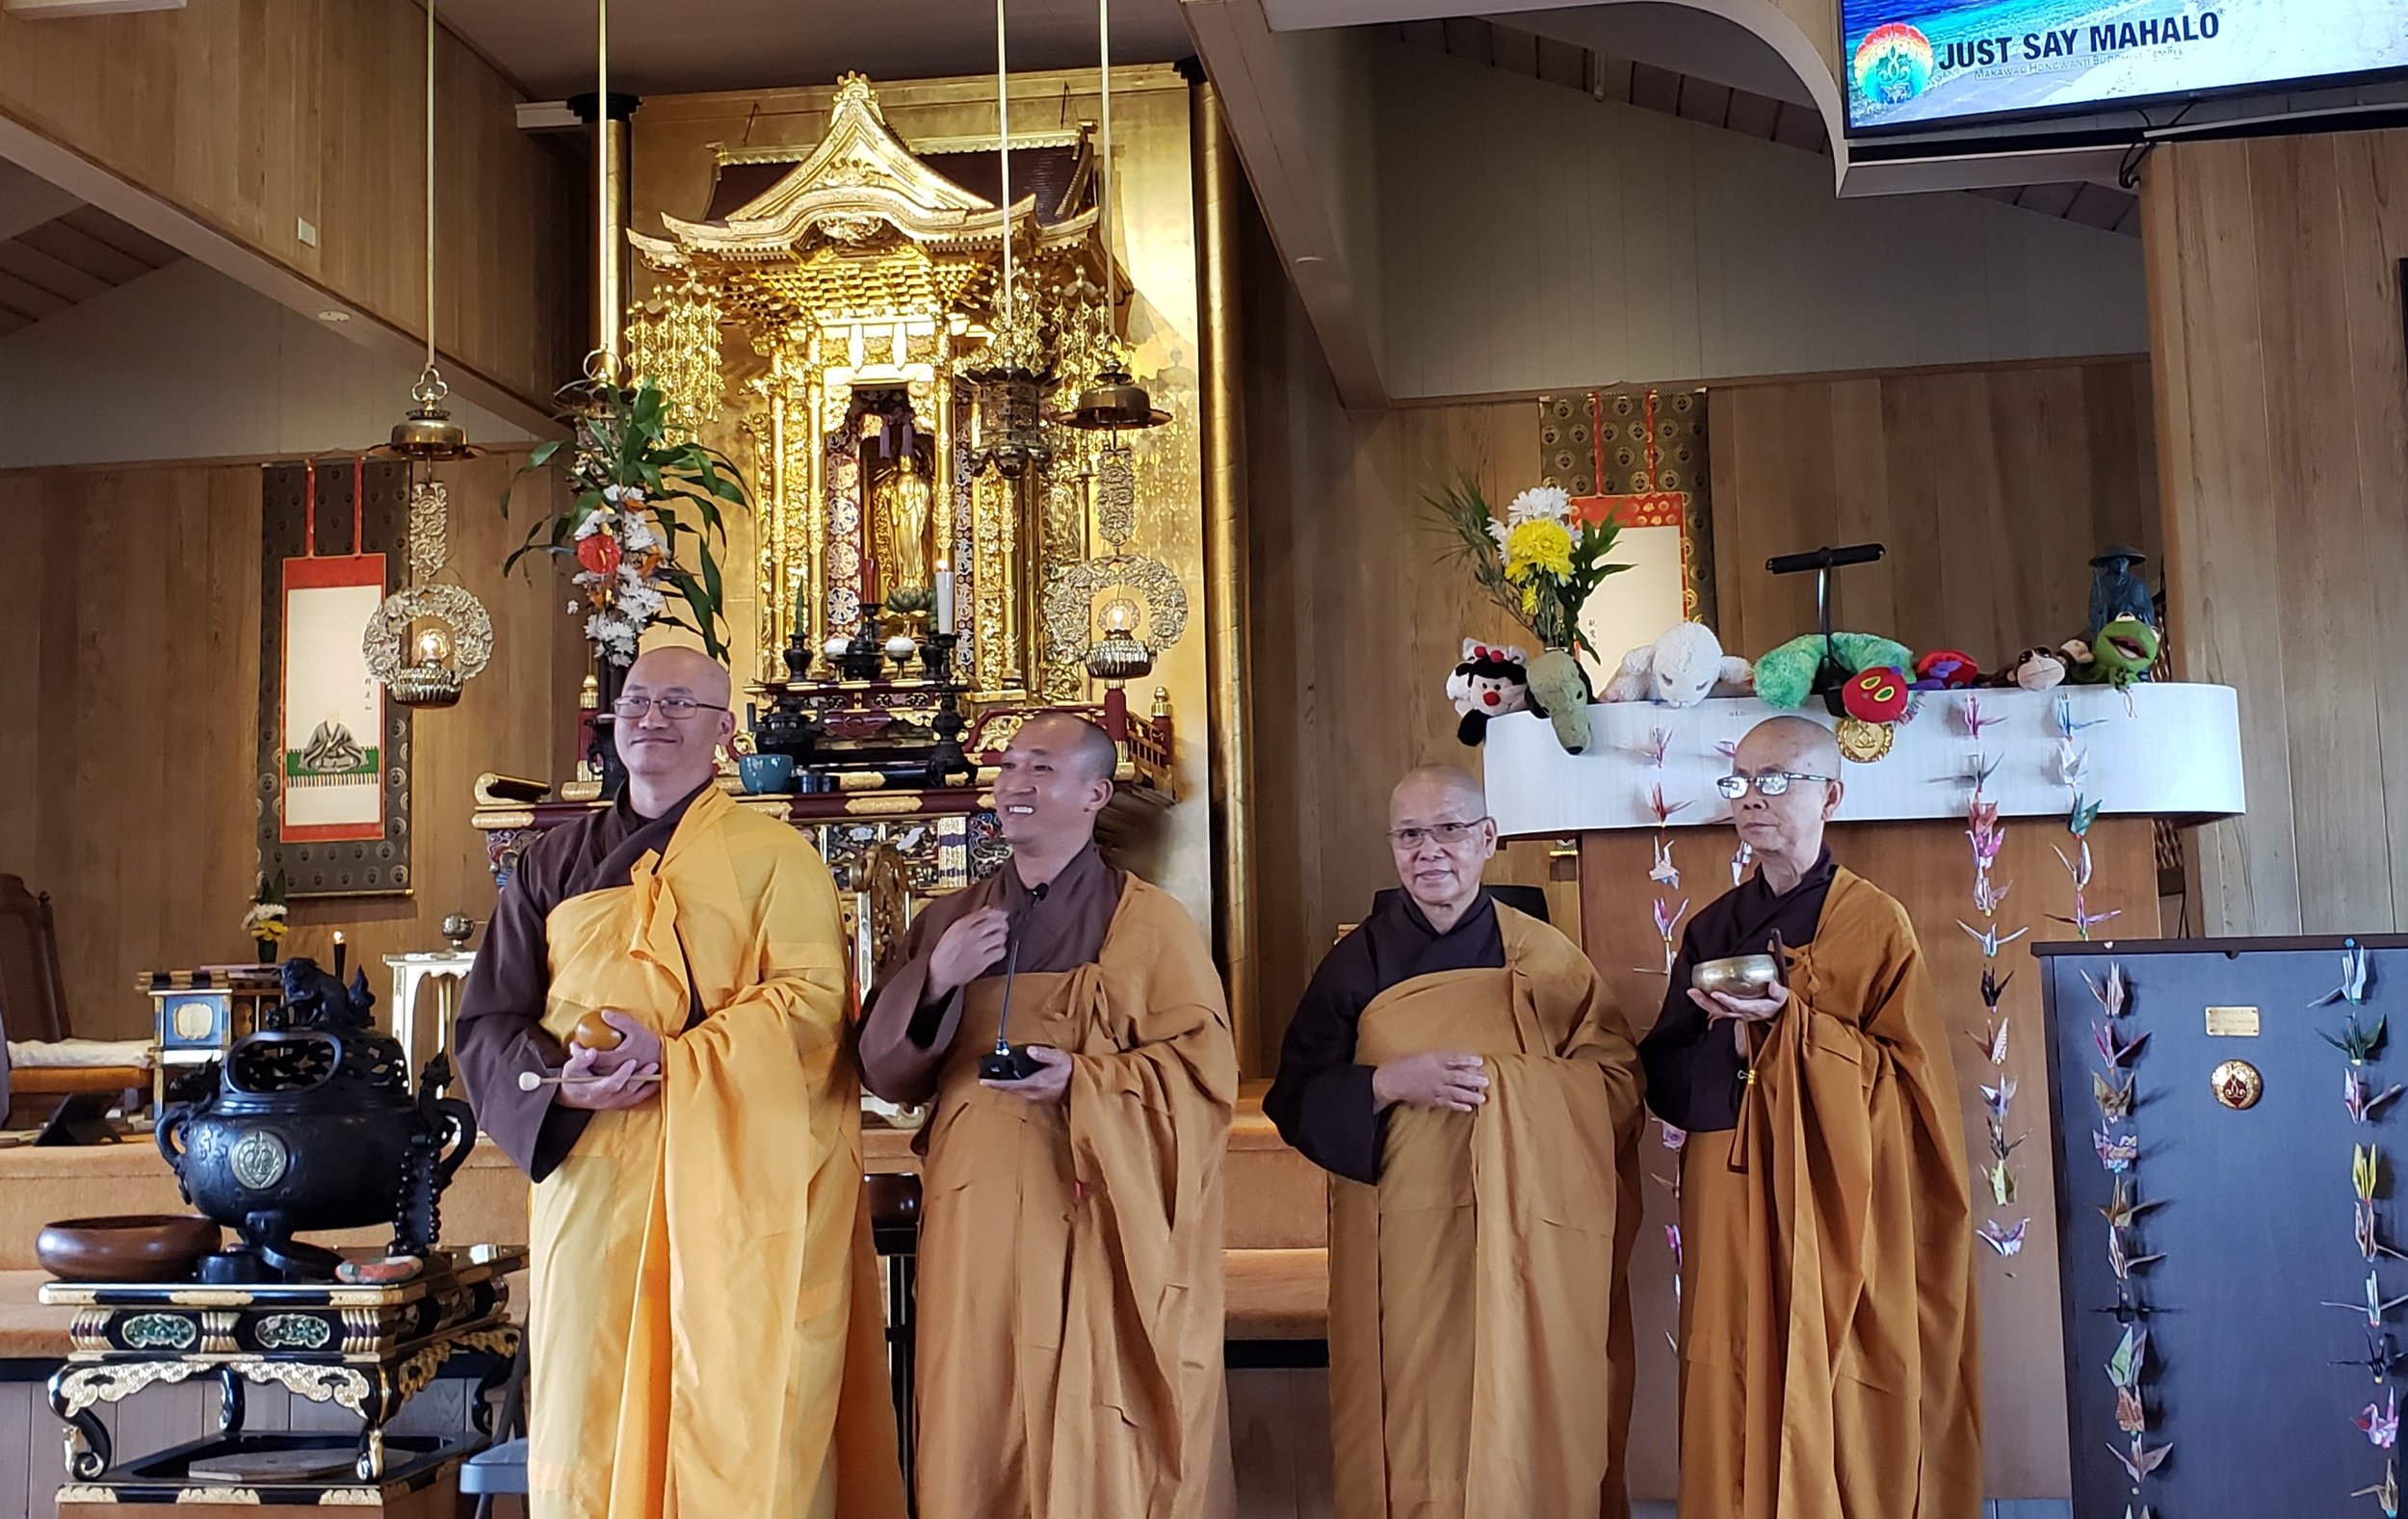   Sisters and Brothers of Vietnamese Buddhist Centers in Hawaii  